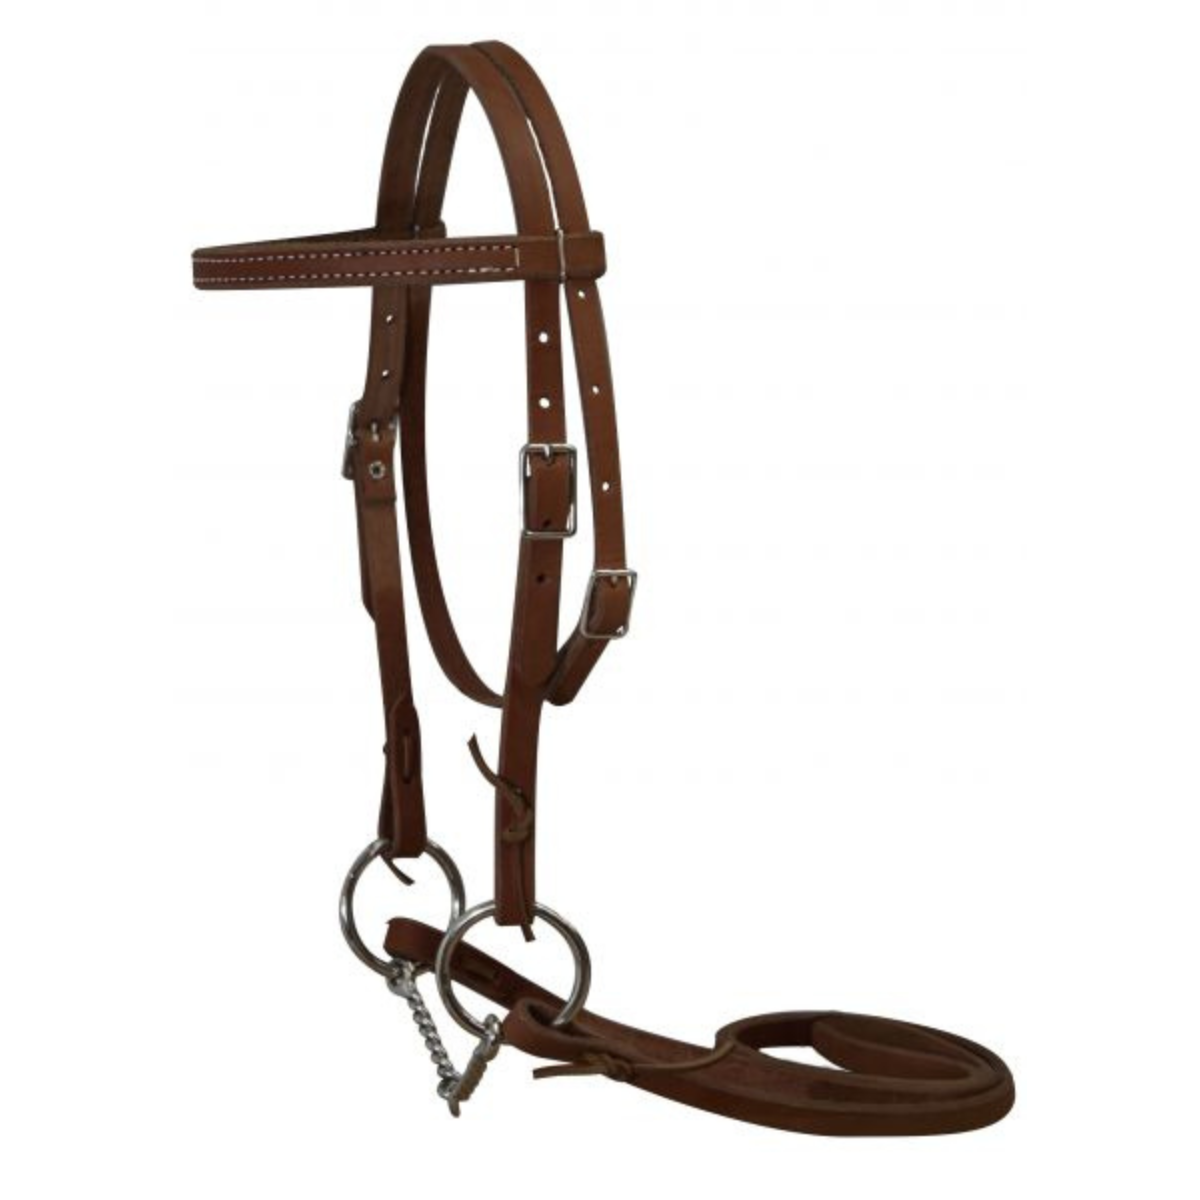 Double stitched pony bridle complete with twisted wire snaffle bit and reins - Double T Saddles